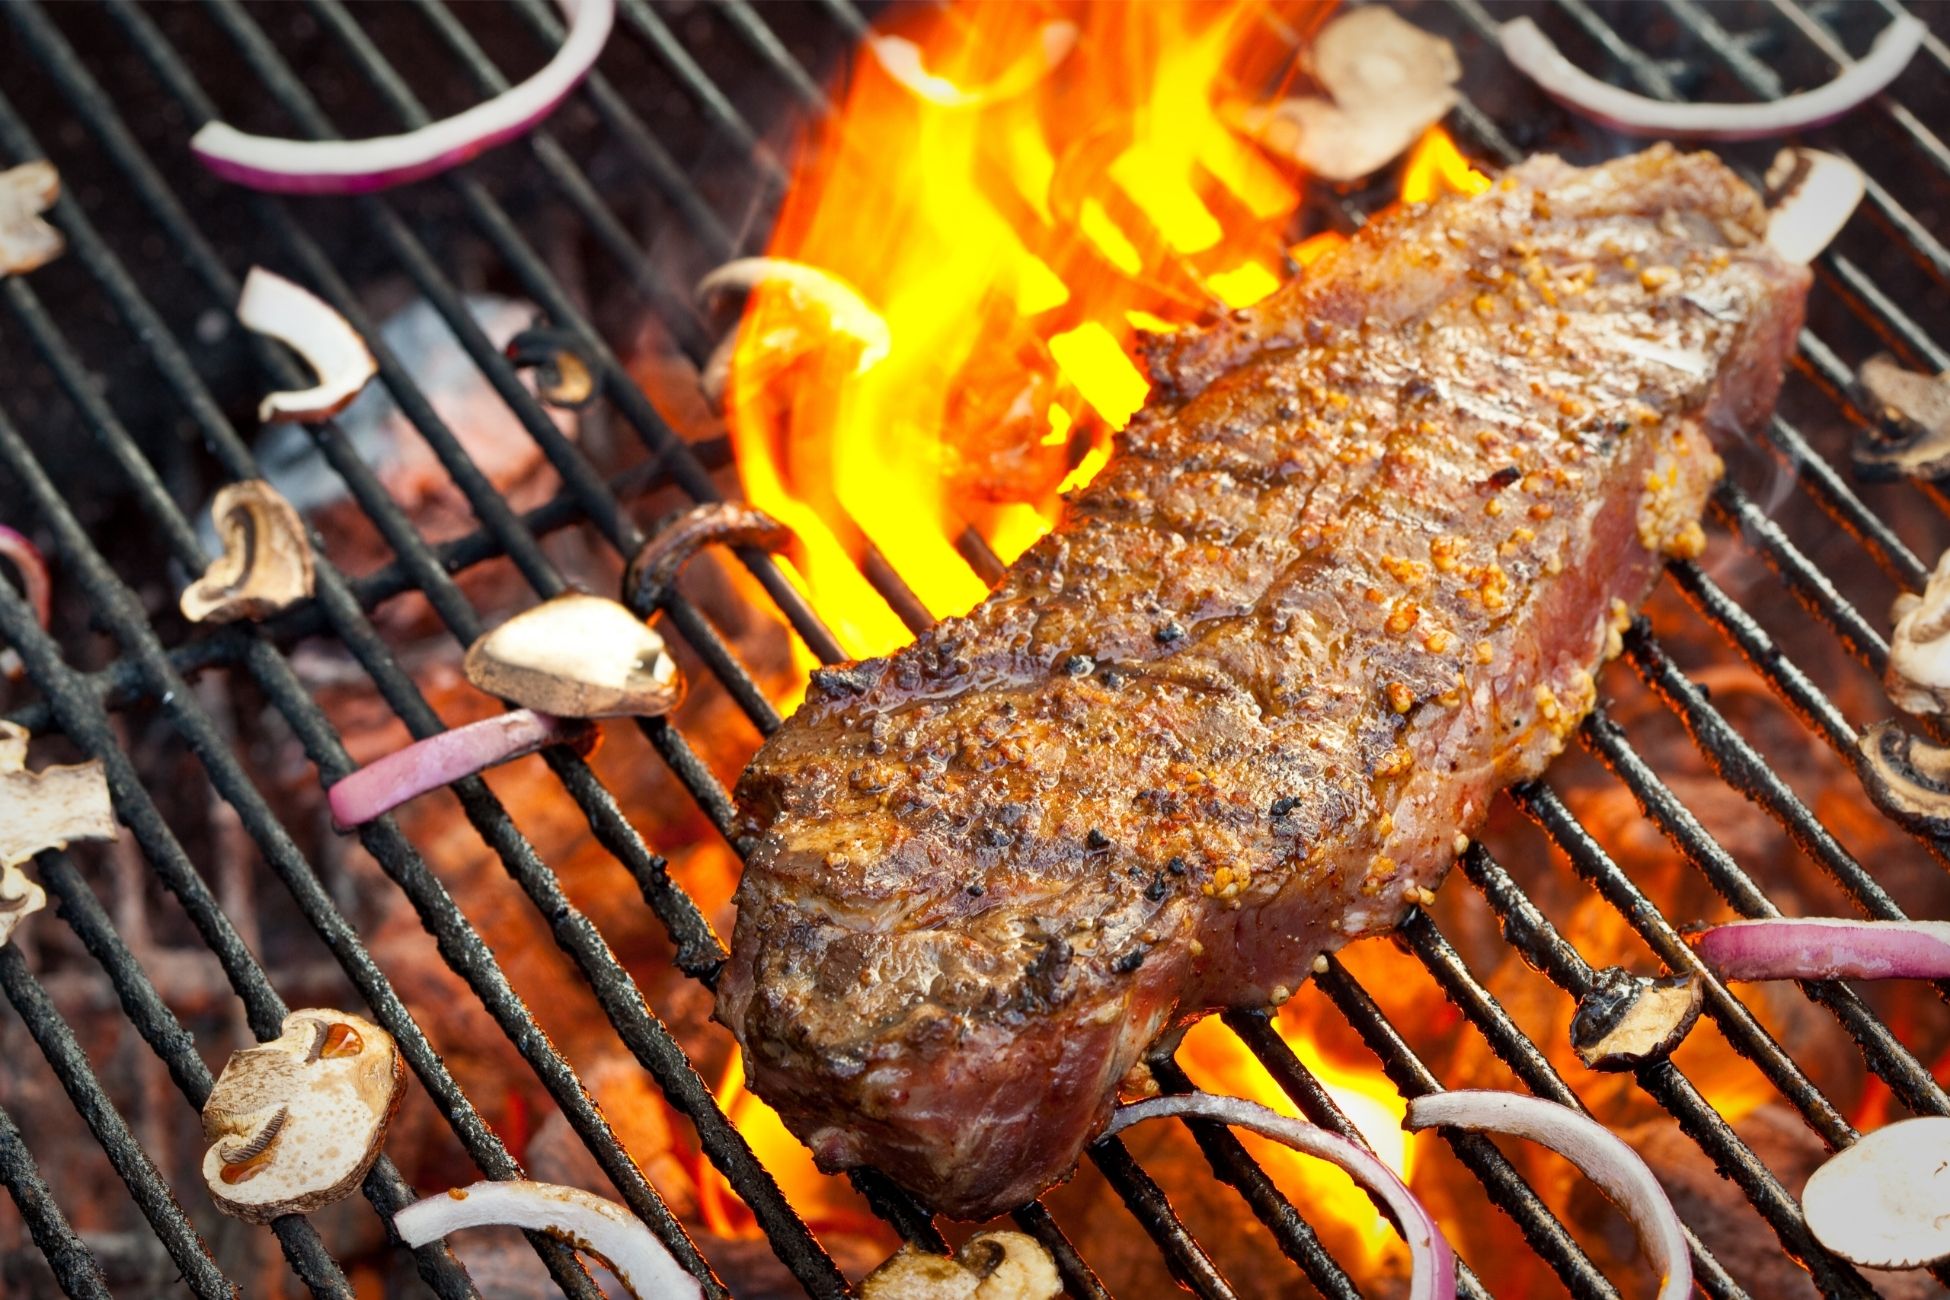 How to Heat Your Grill to Cook a Steak